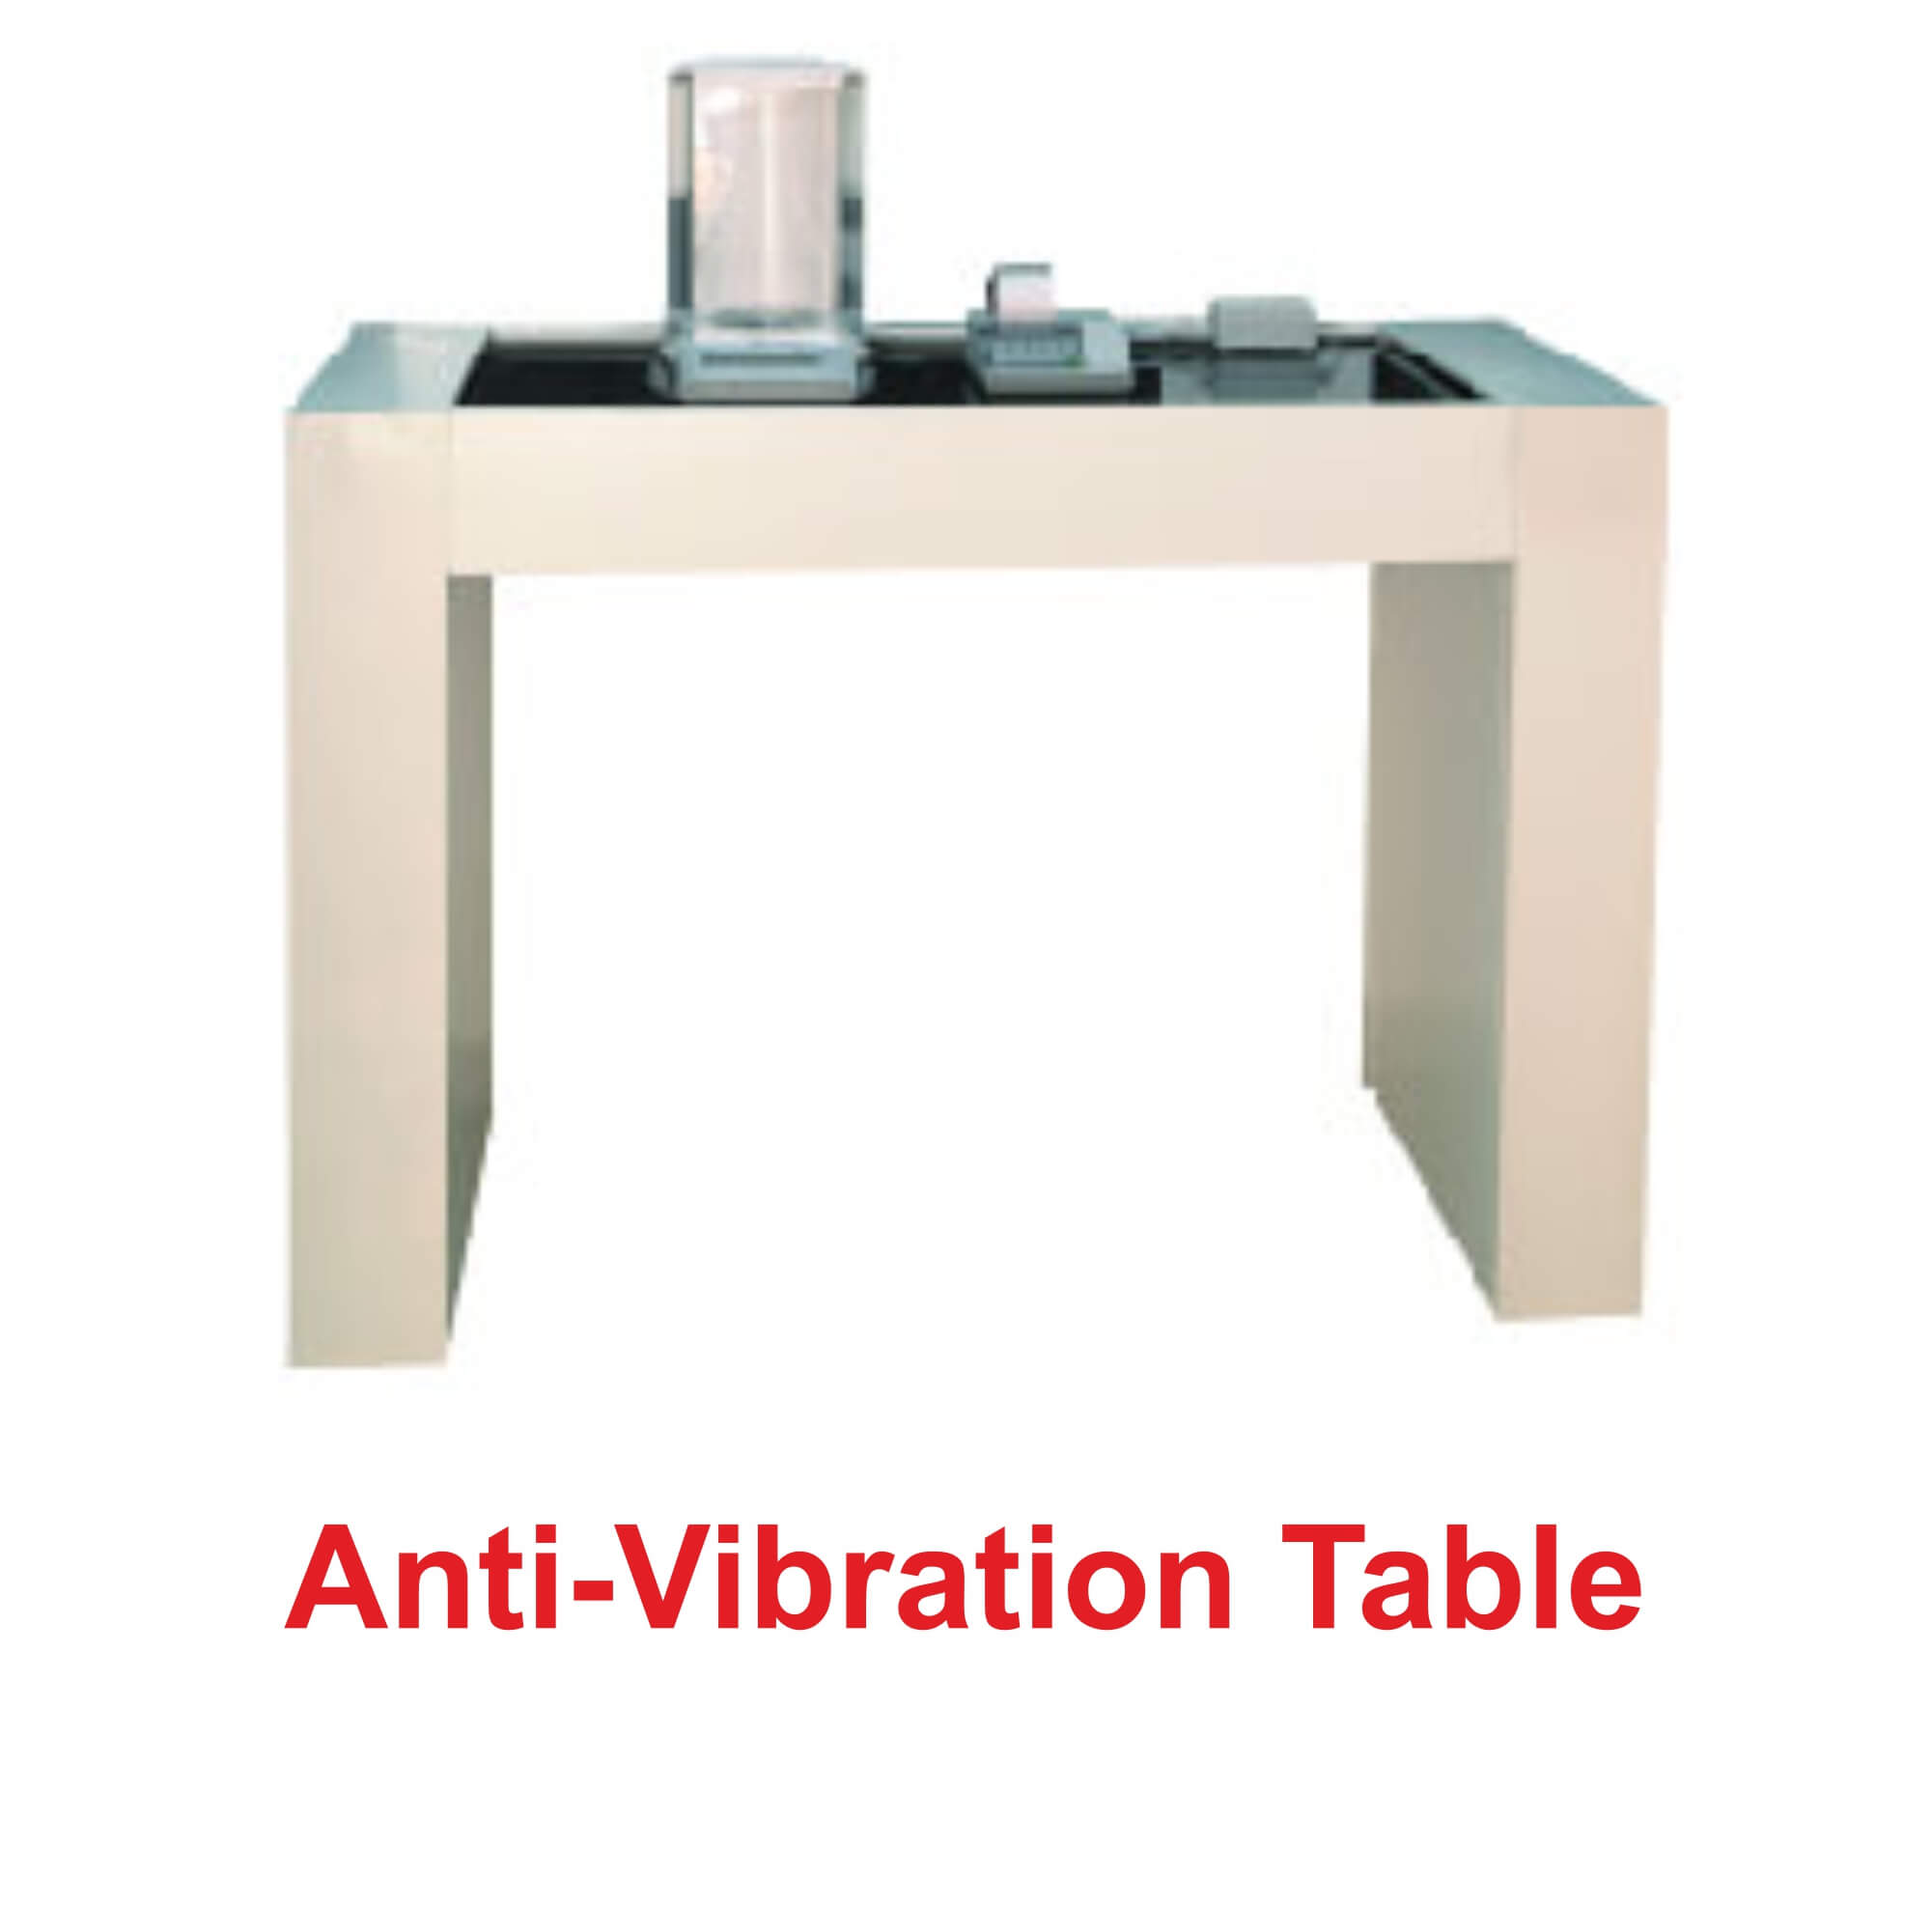 Anti-Vibration Table Manufacturer in India